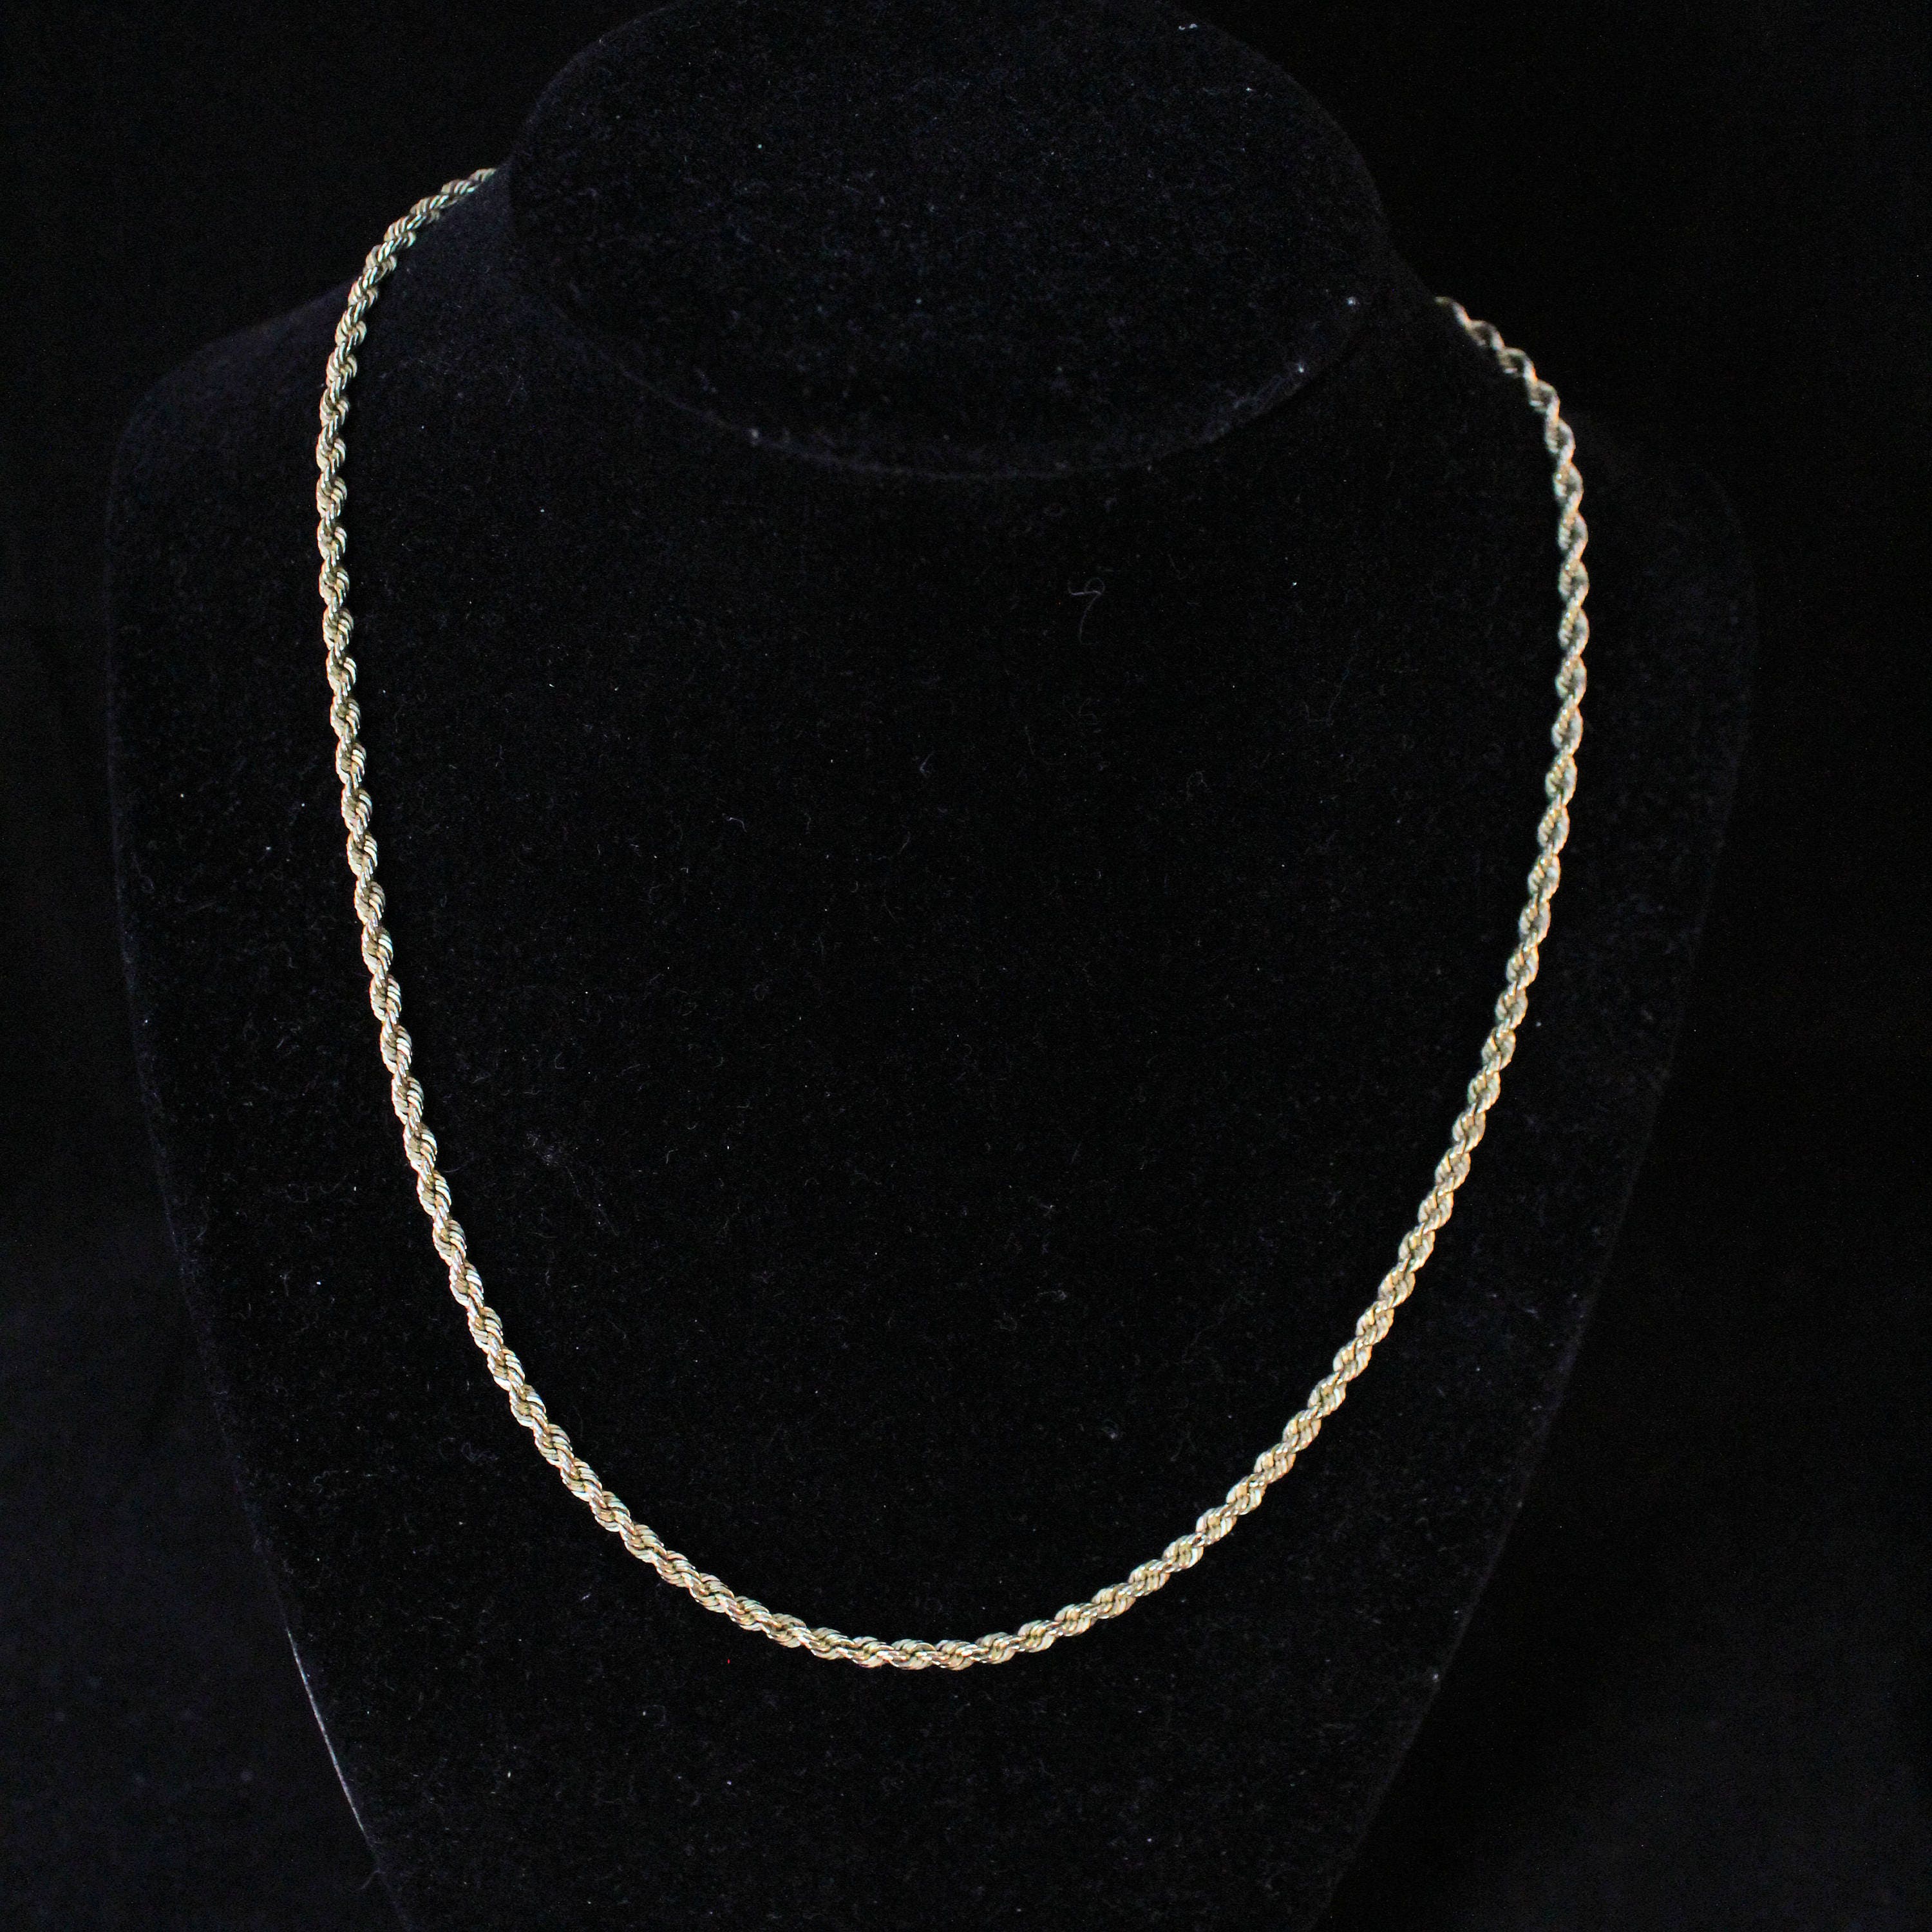 012 Gauge Rope Chain Necklace in 14K Gold - 20